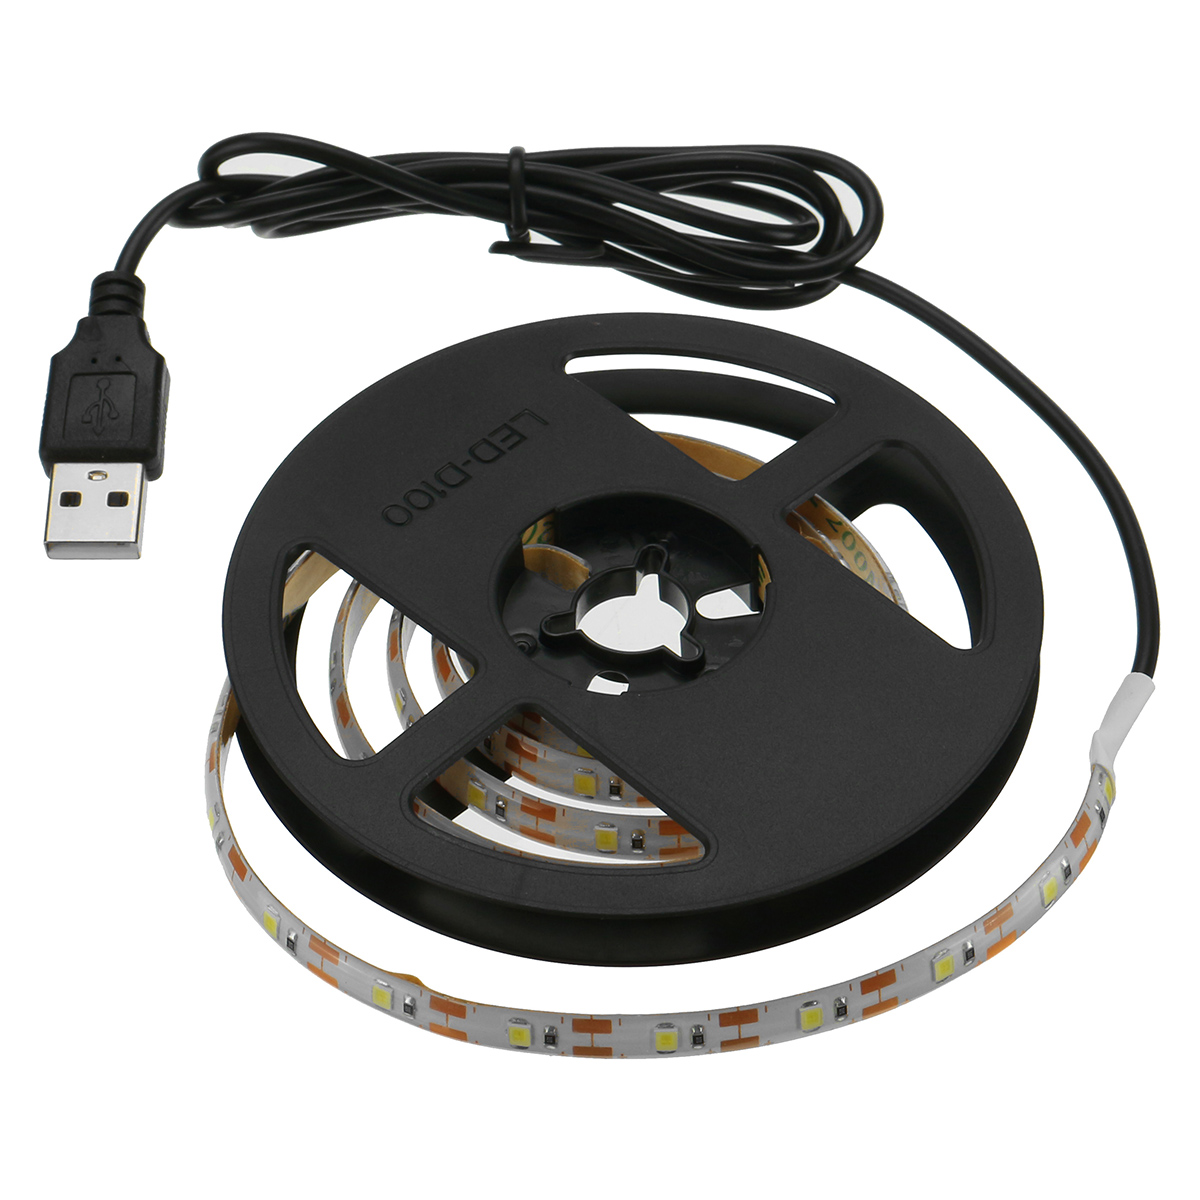 Find LED Light Strip USB Waterproof Lamp String LED Light with 5V USB TV Background Light Waterproof Christmas Decorations Clearance Christmas Lights for Sale on Gipsybee.com with cryptocurrencies